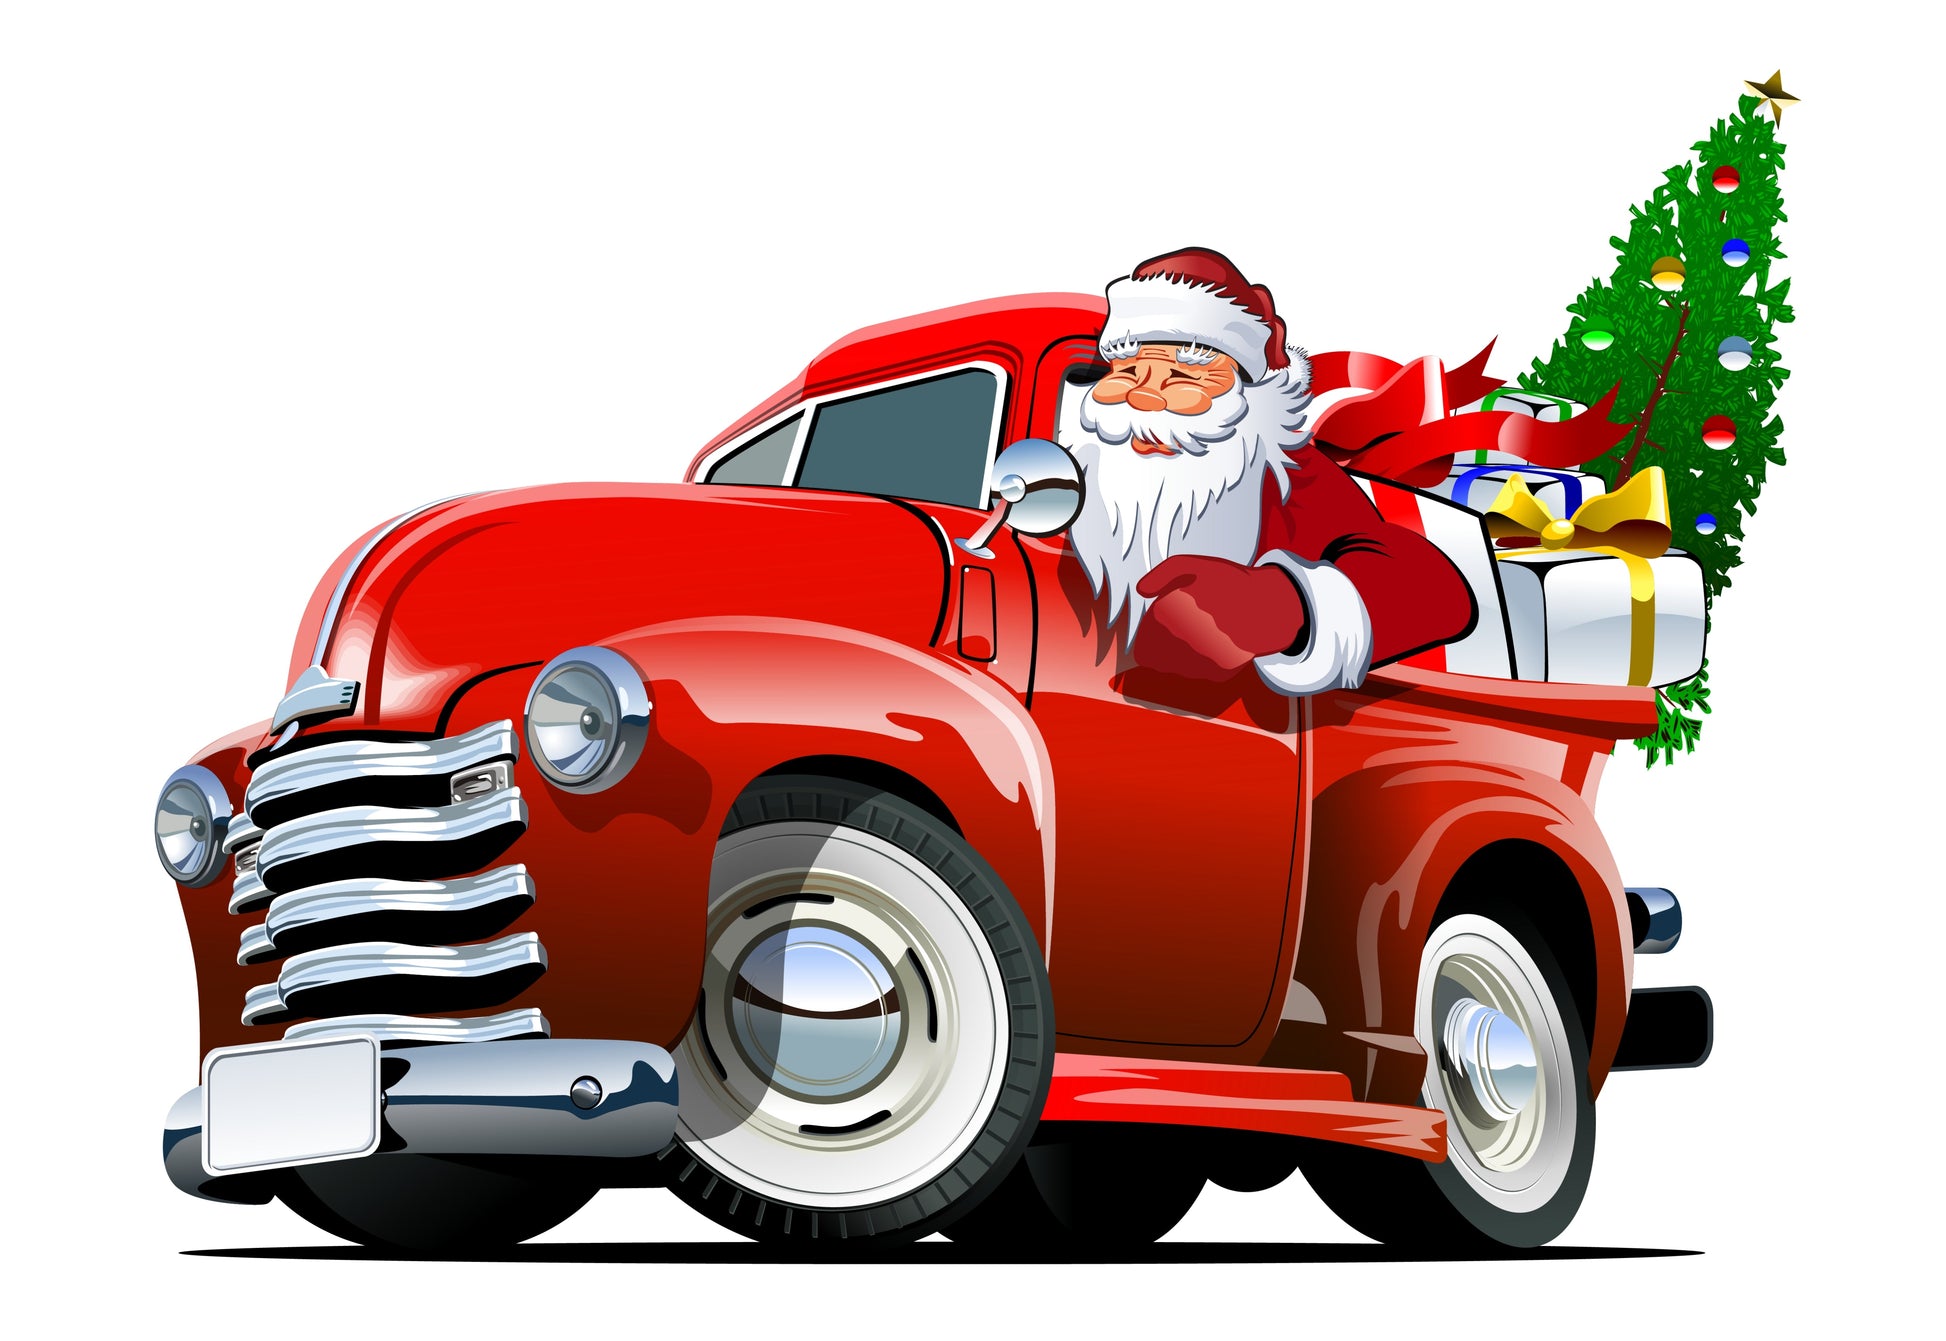 Swedish Christmas Santa in red truck with presents Dishcloth. Vibrant colors.